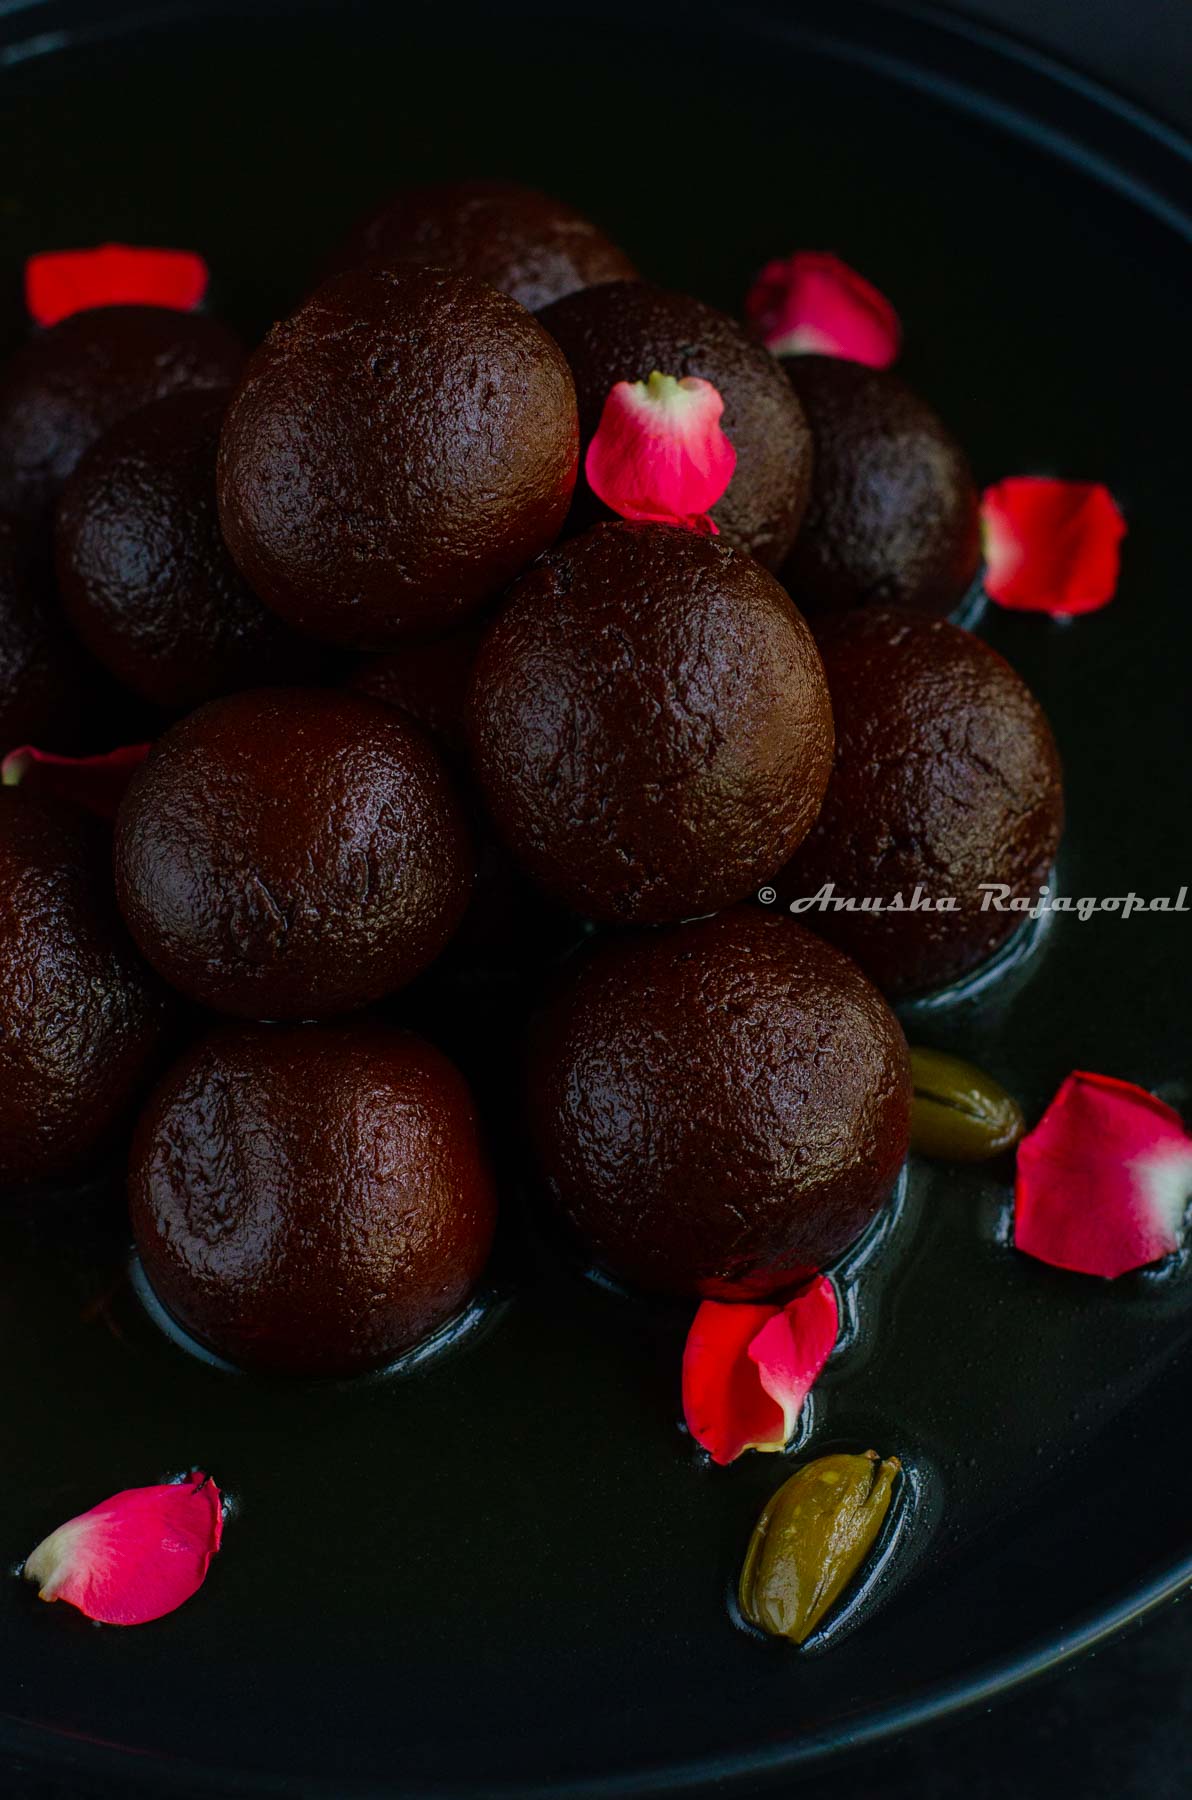 juicy black jamuns stacked and served on a black plate. Garnished with rose petals.